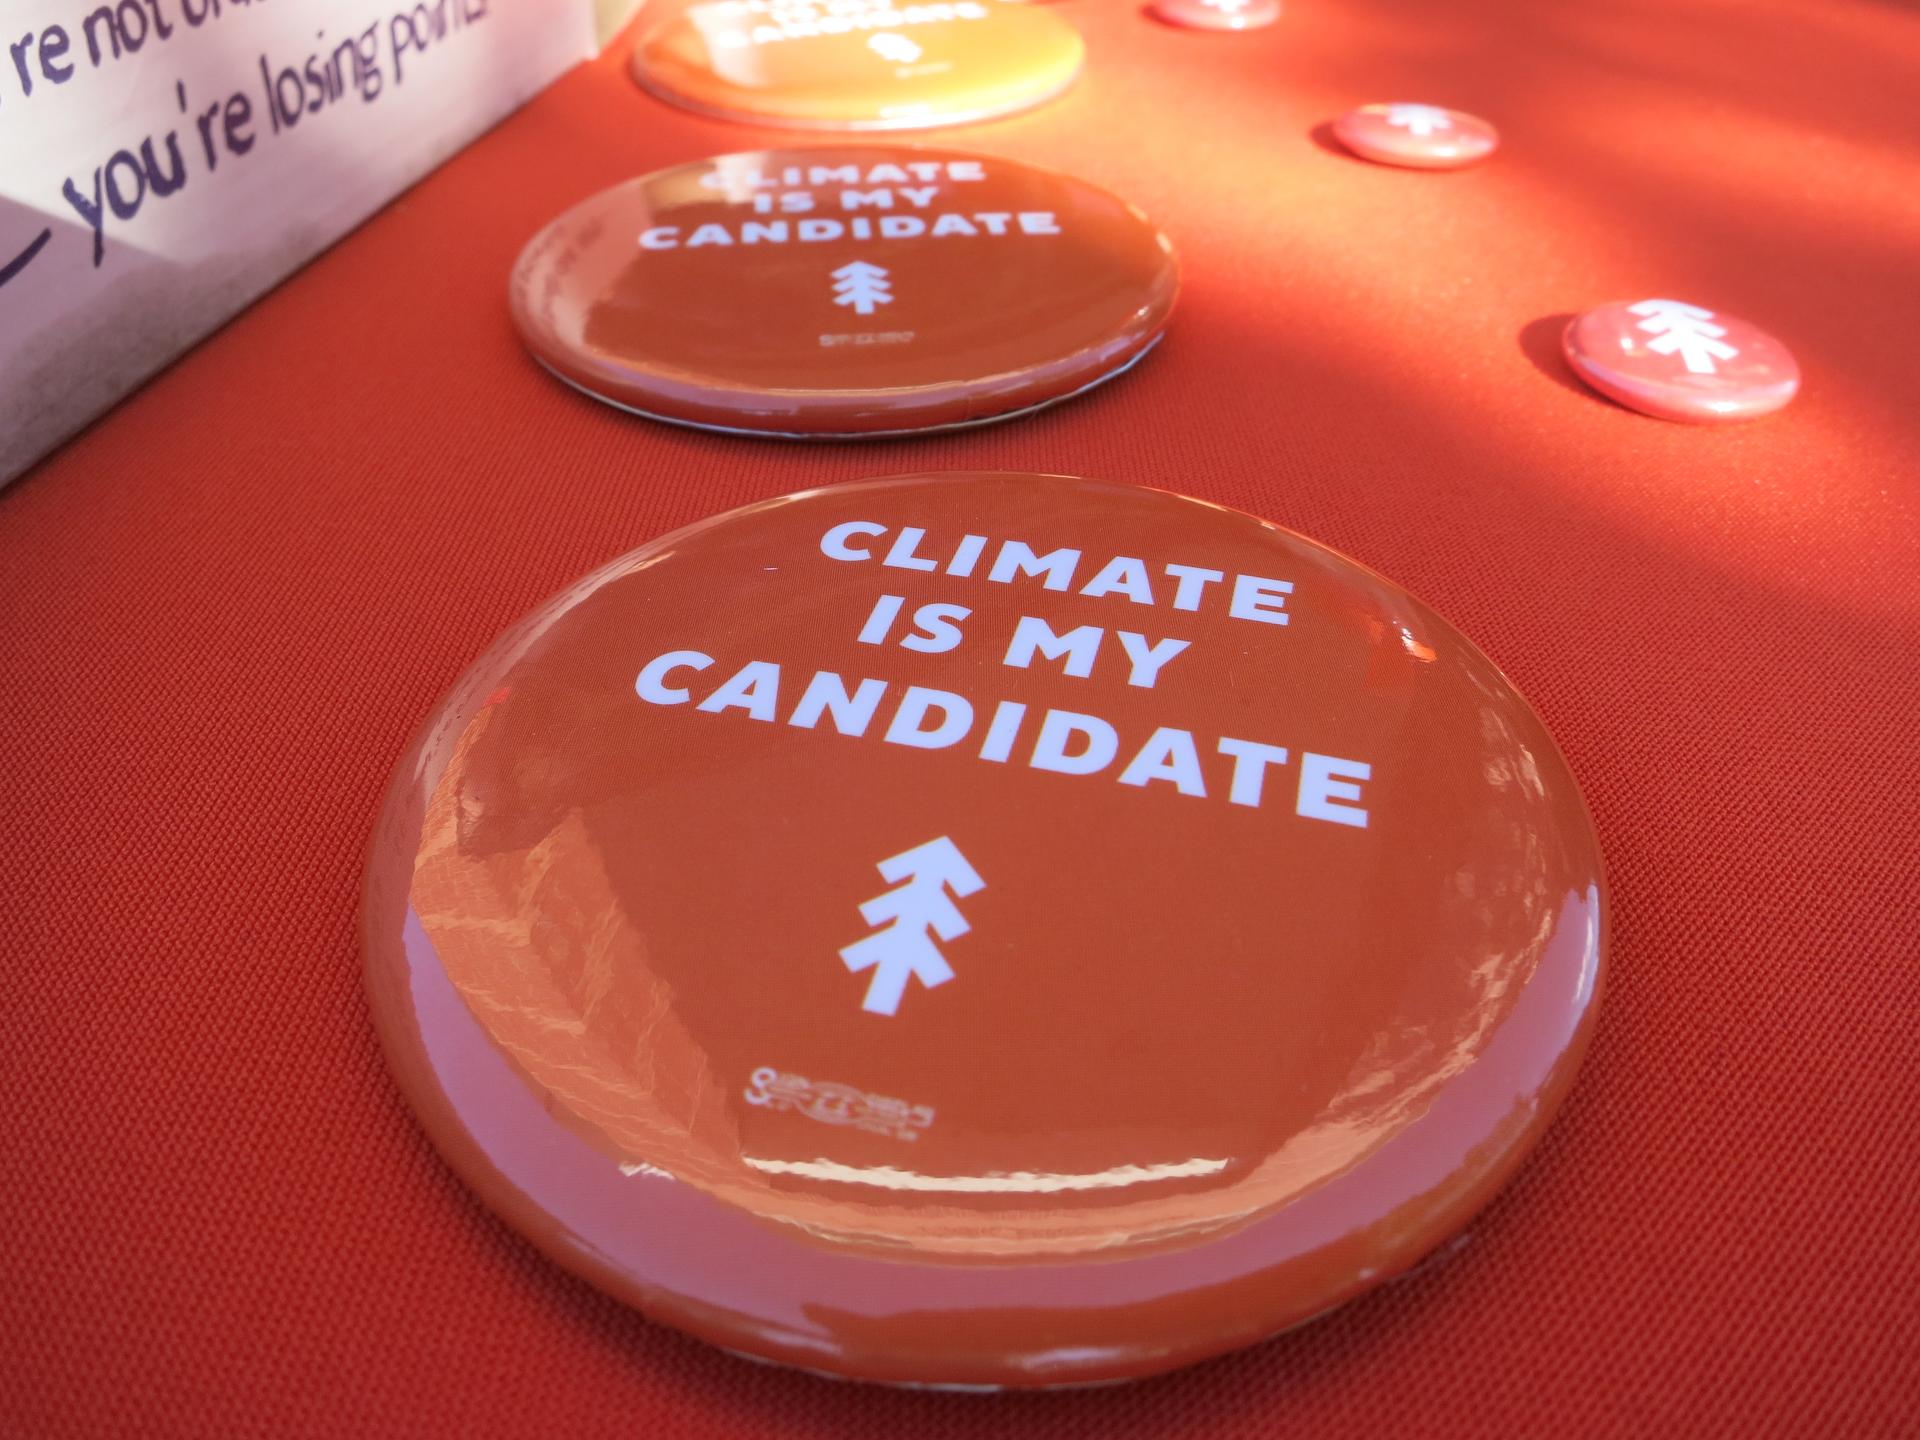 NextGen Climate says it has engaged with about 50,000 young people on 90 college campuses in Pennsylvania.